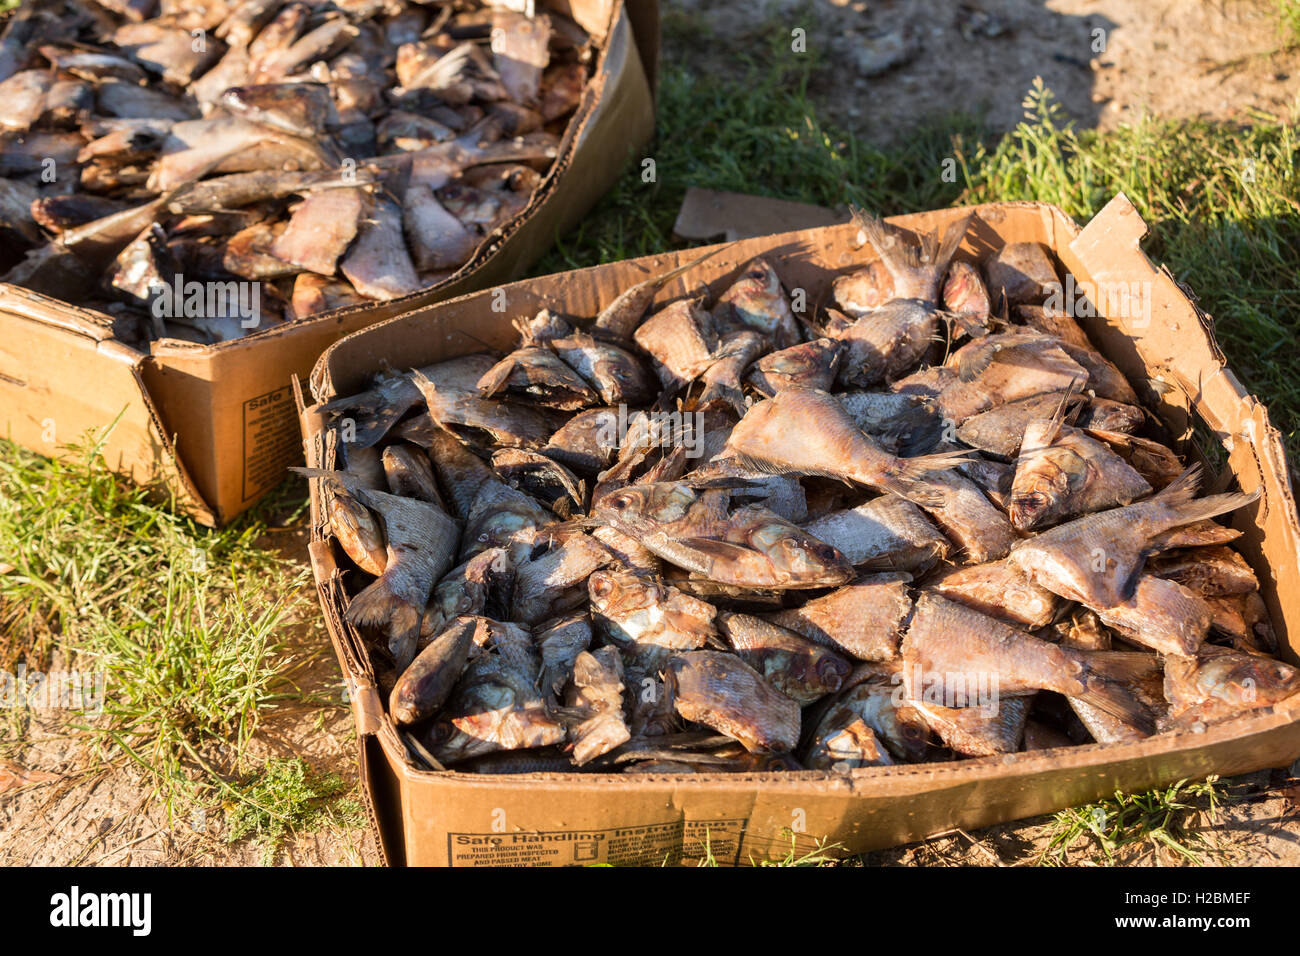 Cut up fish used for bait in crayfish traps in rural Eunice, Louisiana. Crawfish are farmed in flooded rice fields giving farmers a summer rice crop and a winter crawfish harvest. Stock Photo